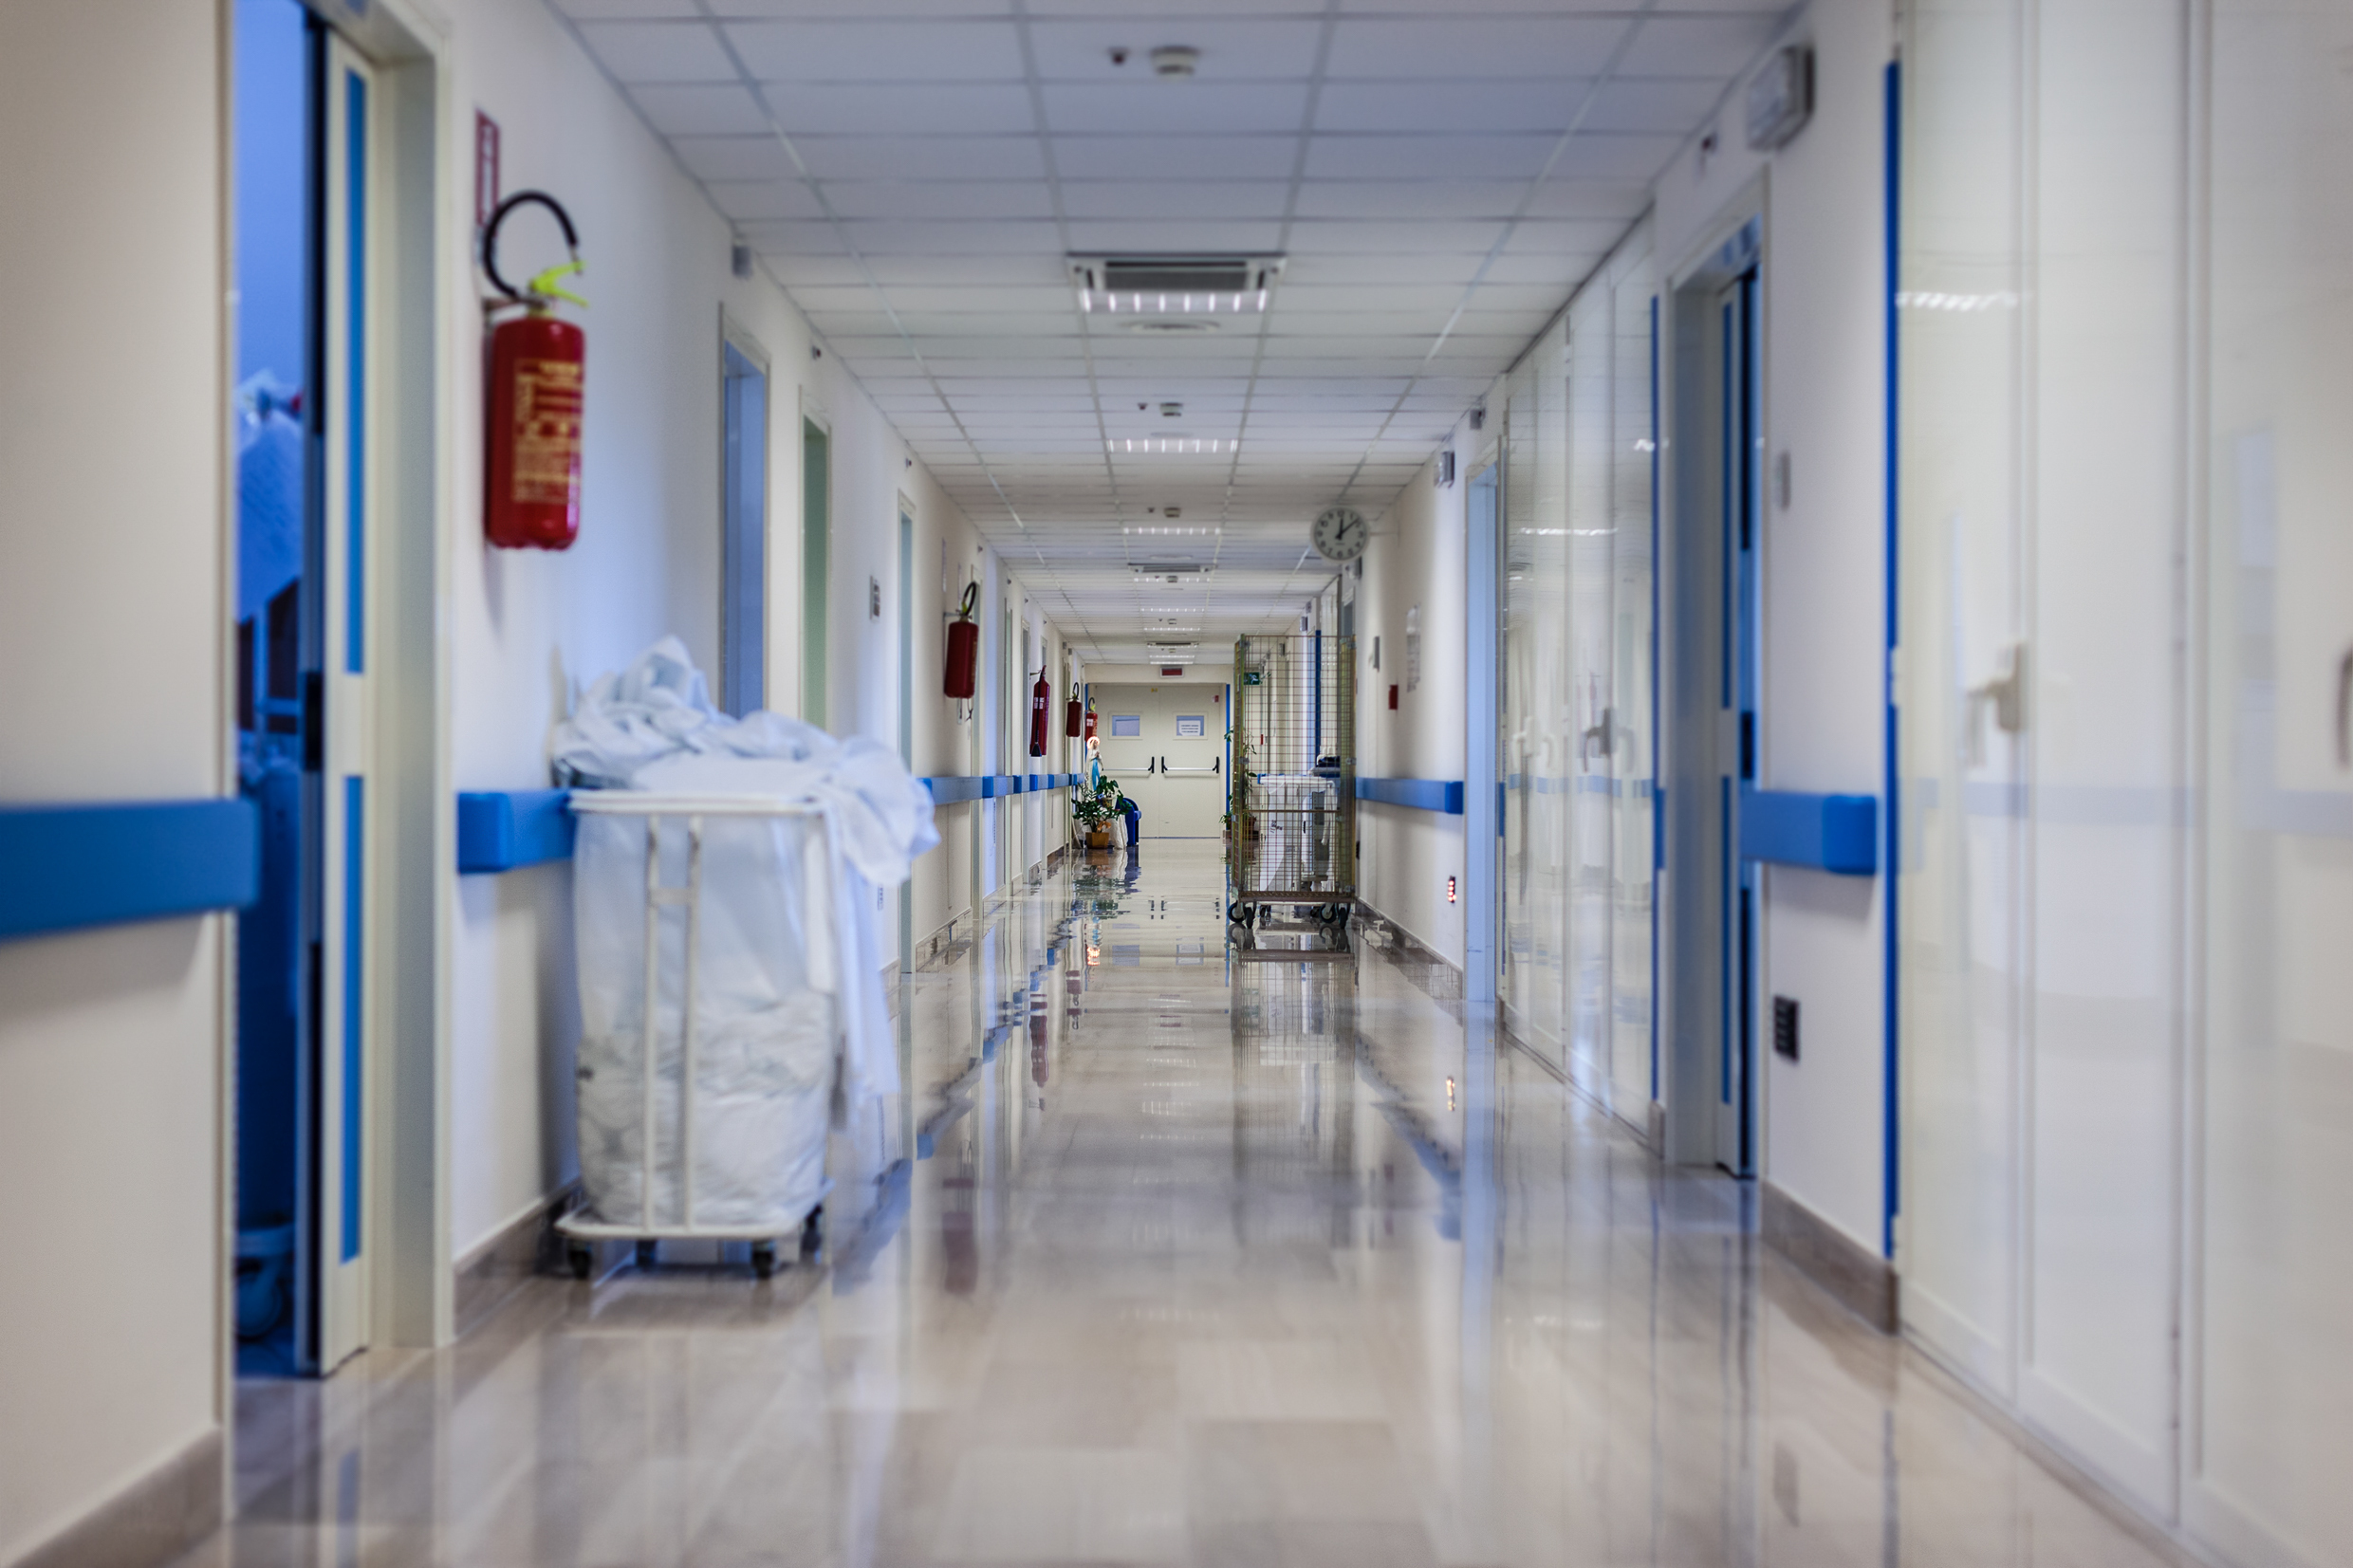 Clean and empty hospital corridor with nobody on sight | Source: Shutterstock.com